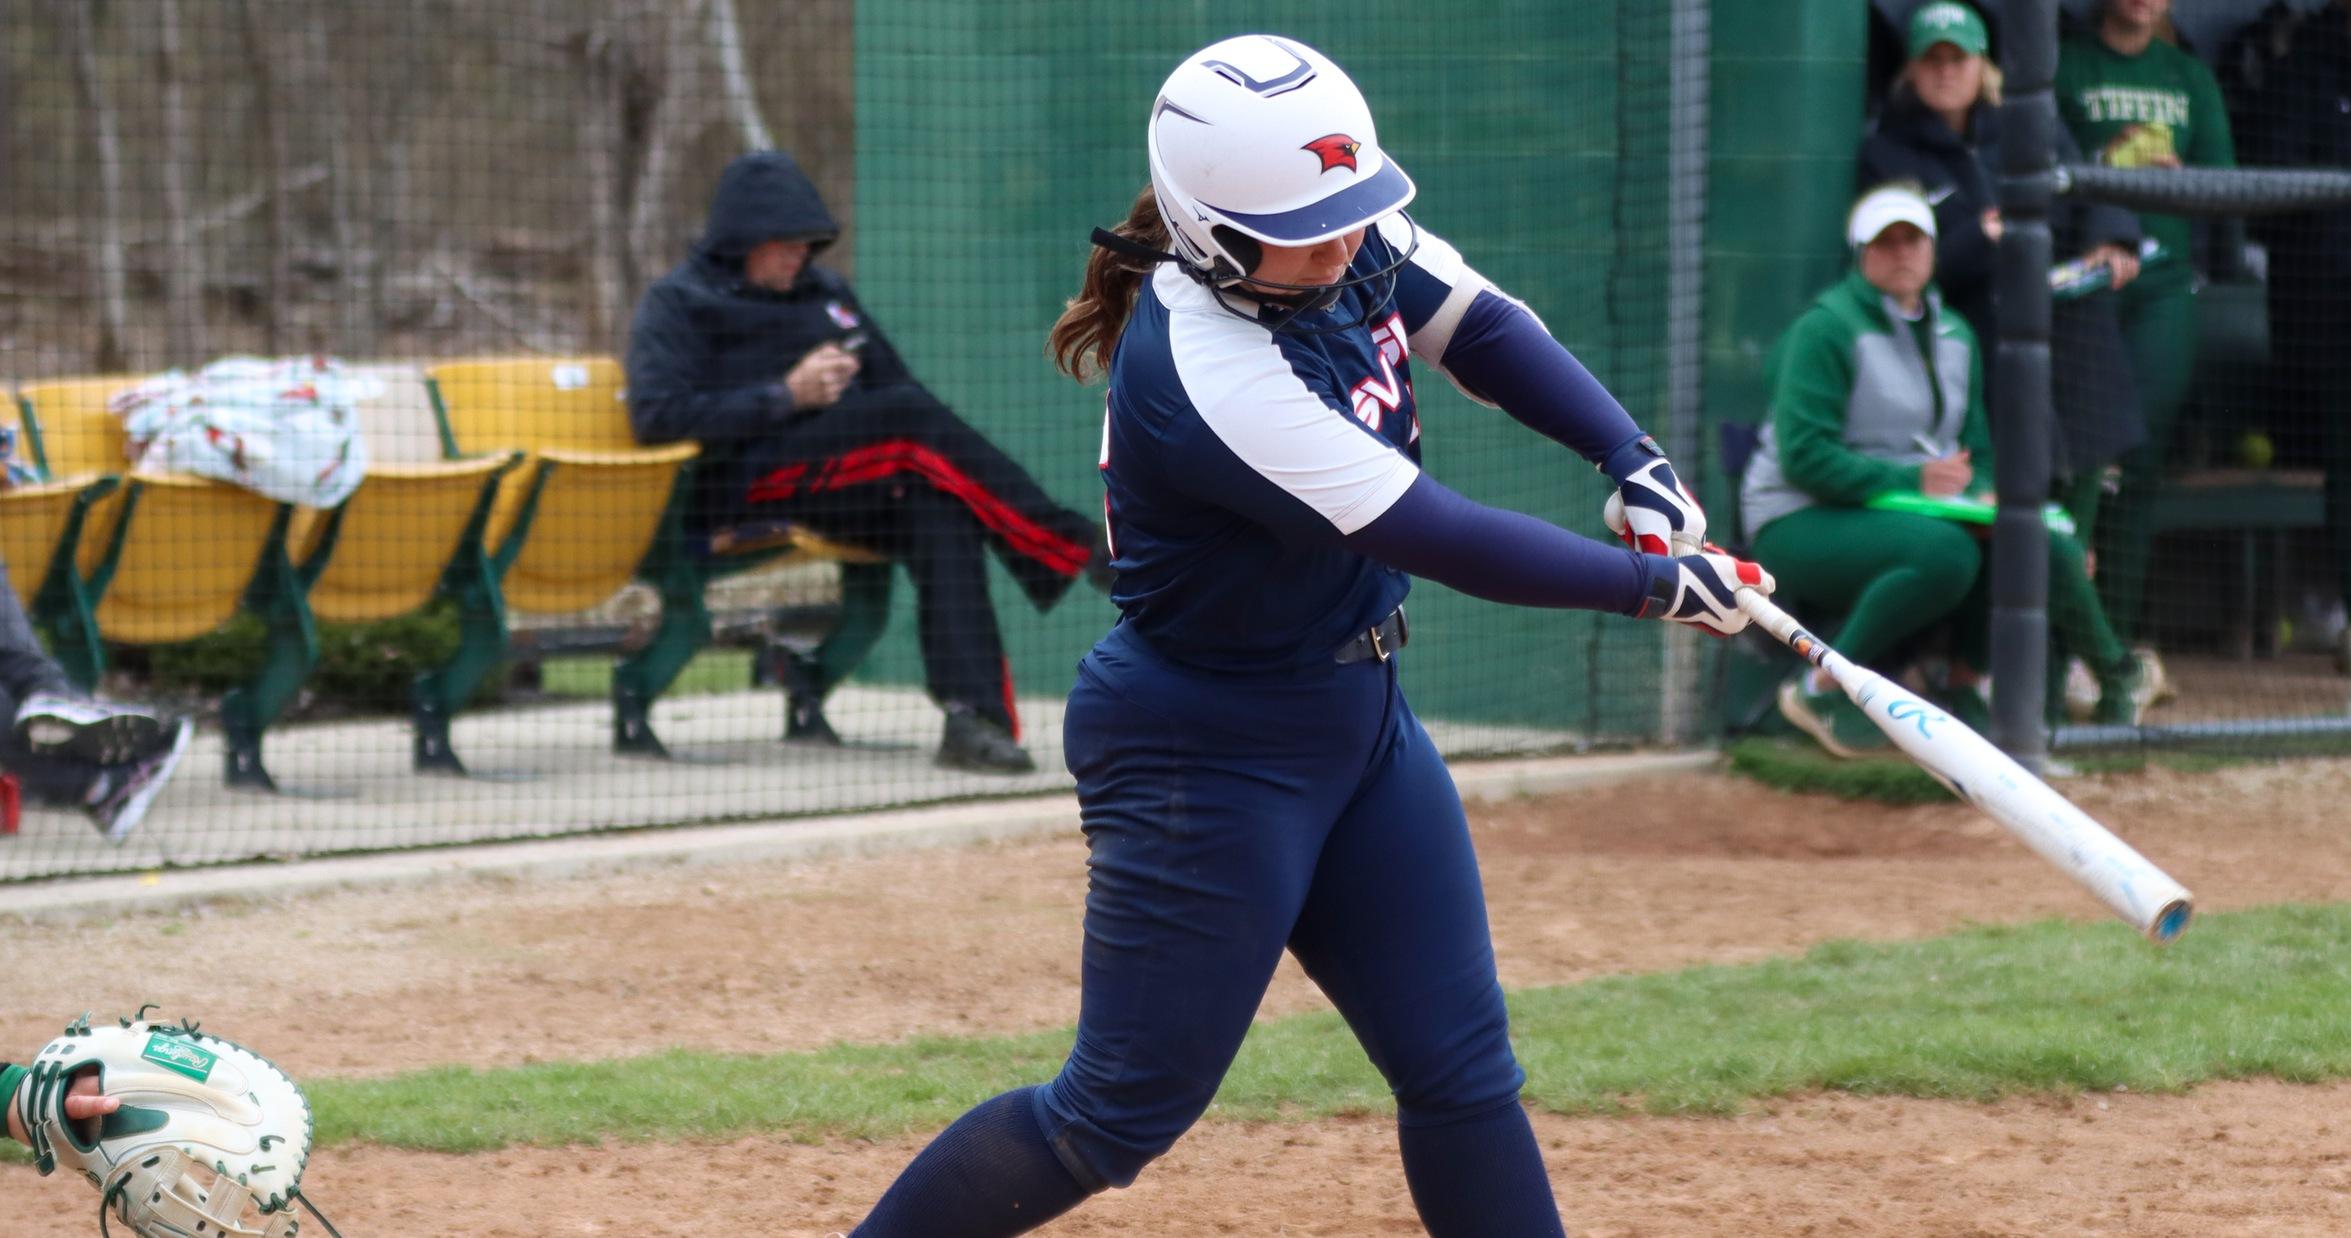 Softball Splits at Tiffin on Day Two of Ohio Trip